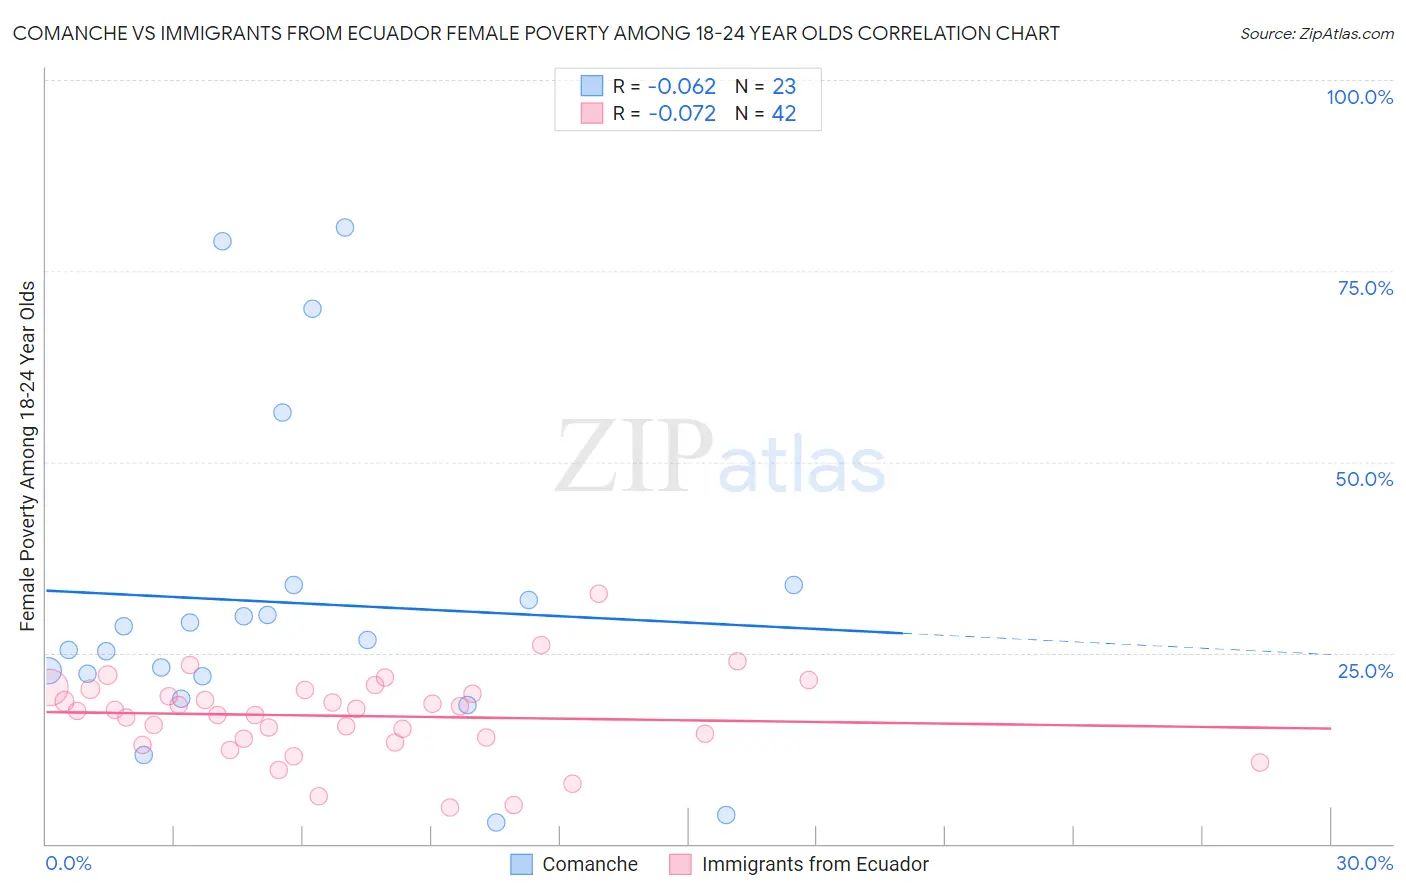 Comanche vs Immigrants from Ecuador Female Poverty Among 18-24 Year Olds